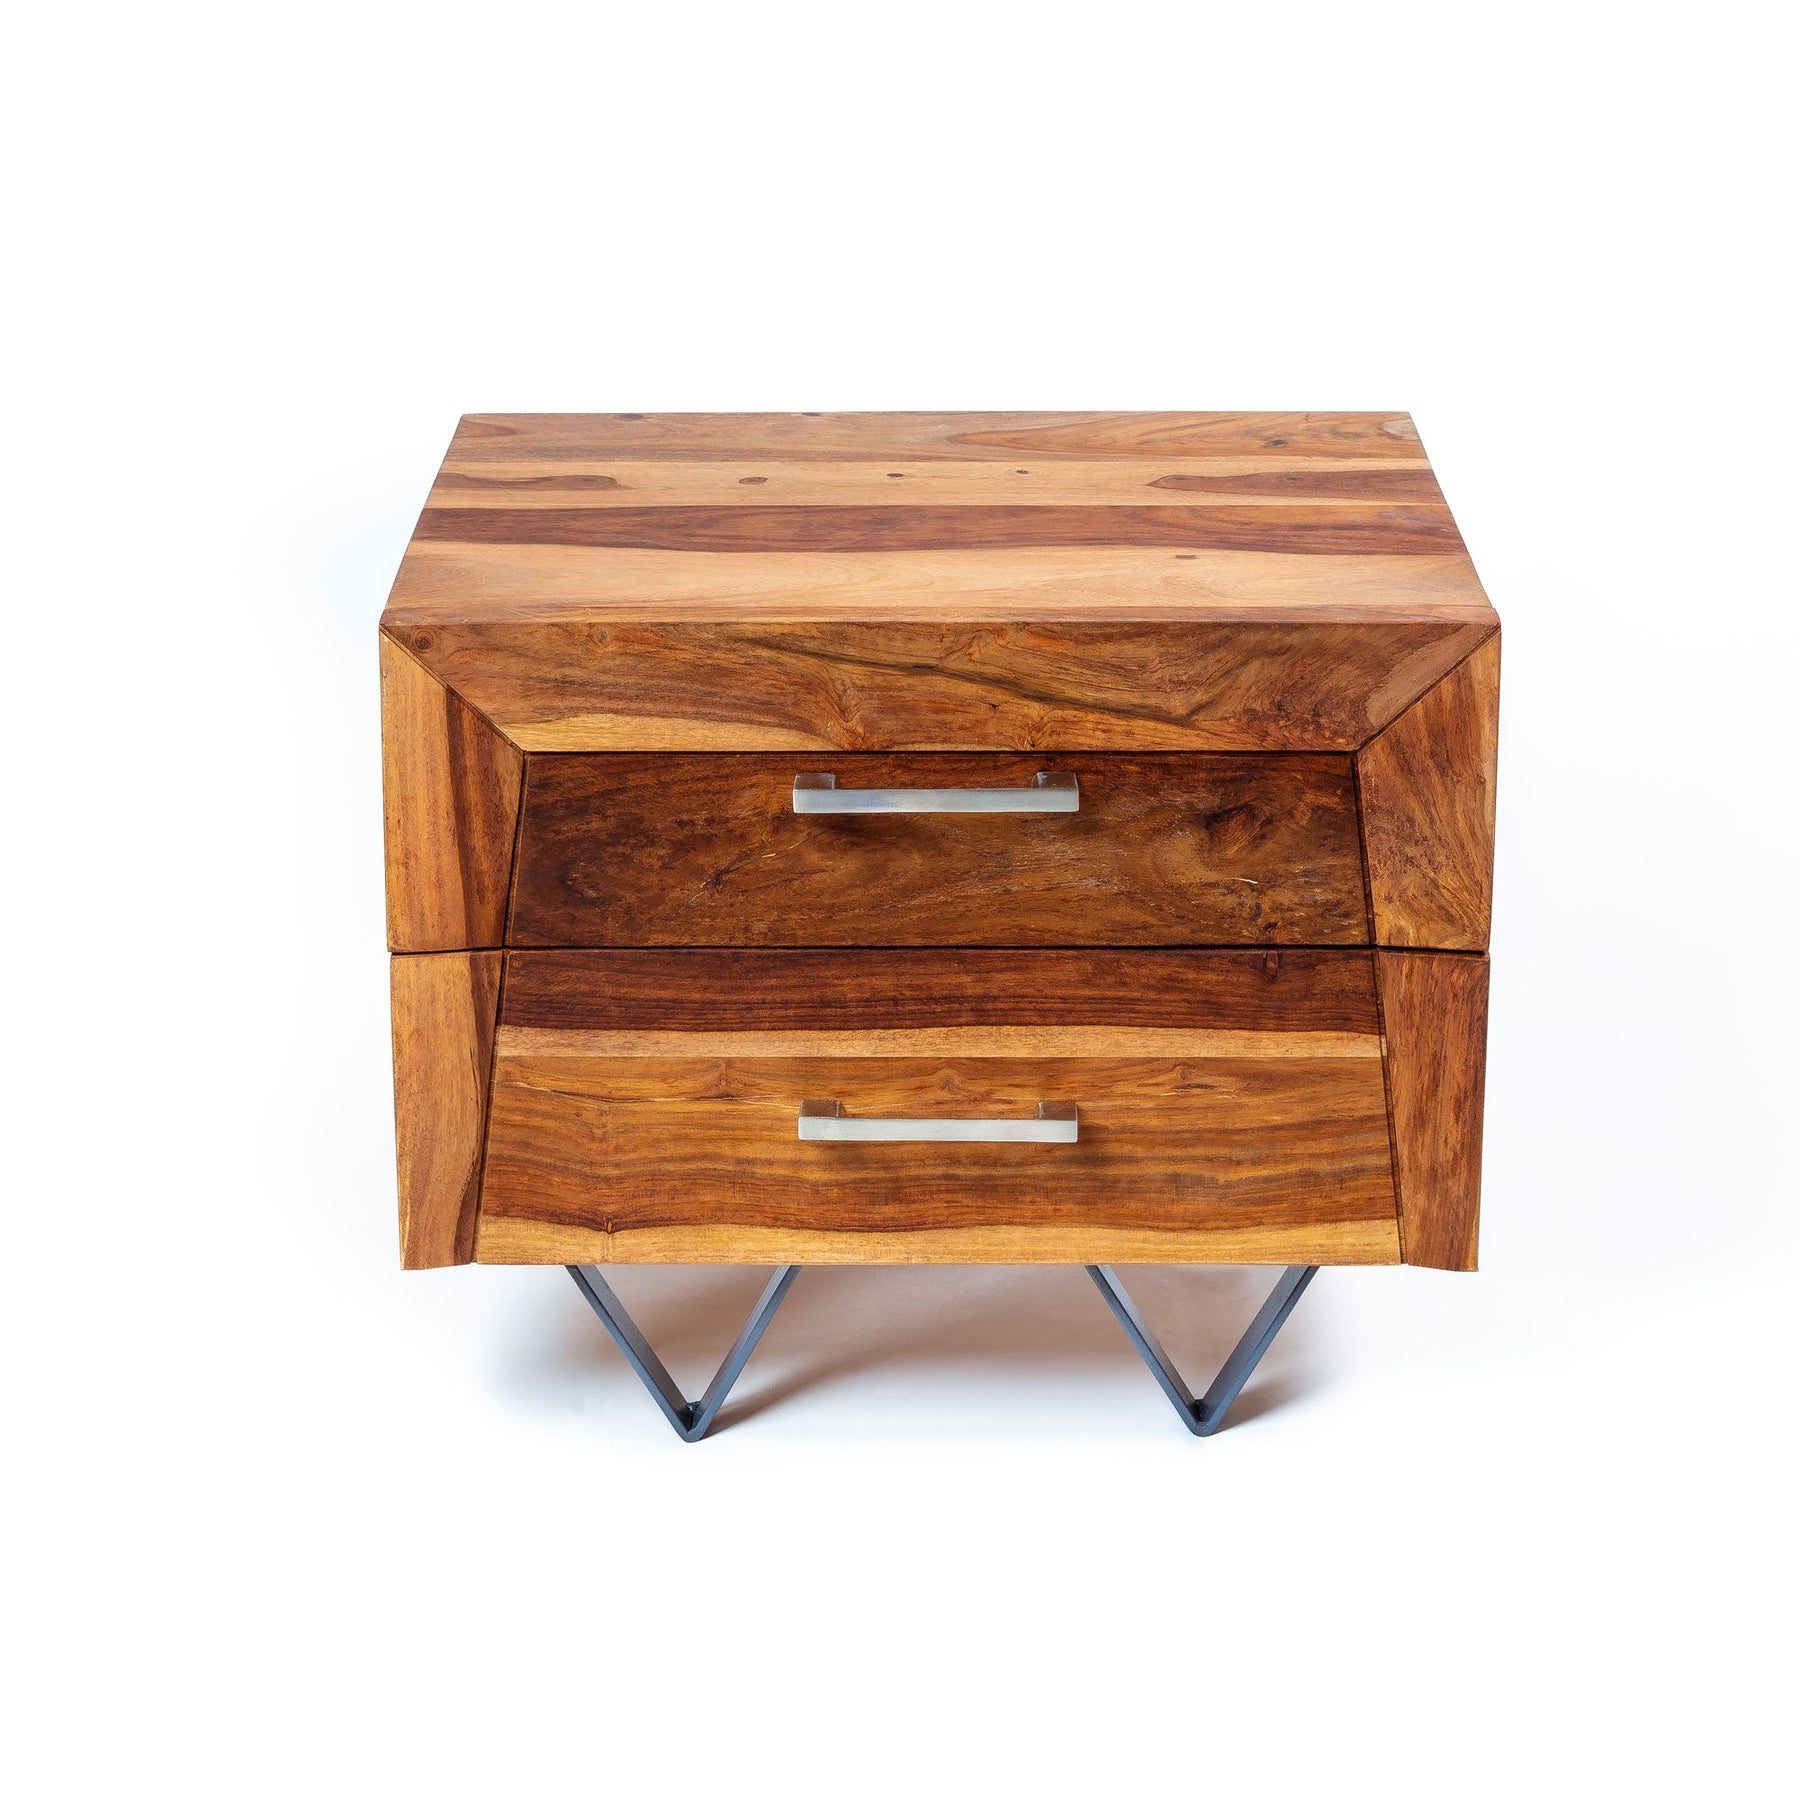 Bedside Table | Wooden Nightstand with 2 Drawers and Handles, Side End Table for Bedroom/Living Room | 48x40x40 cm